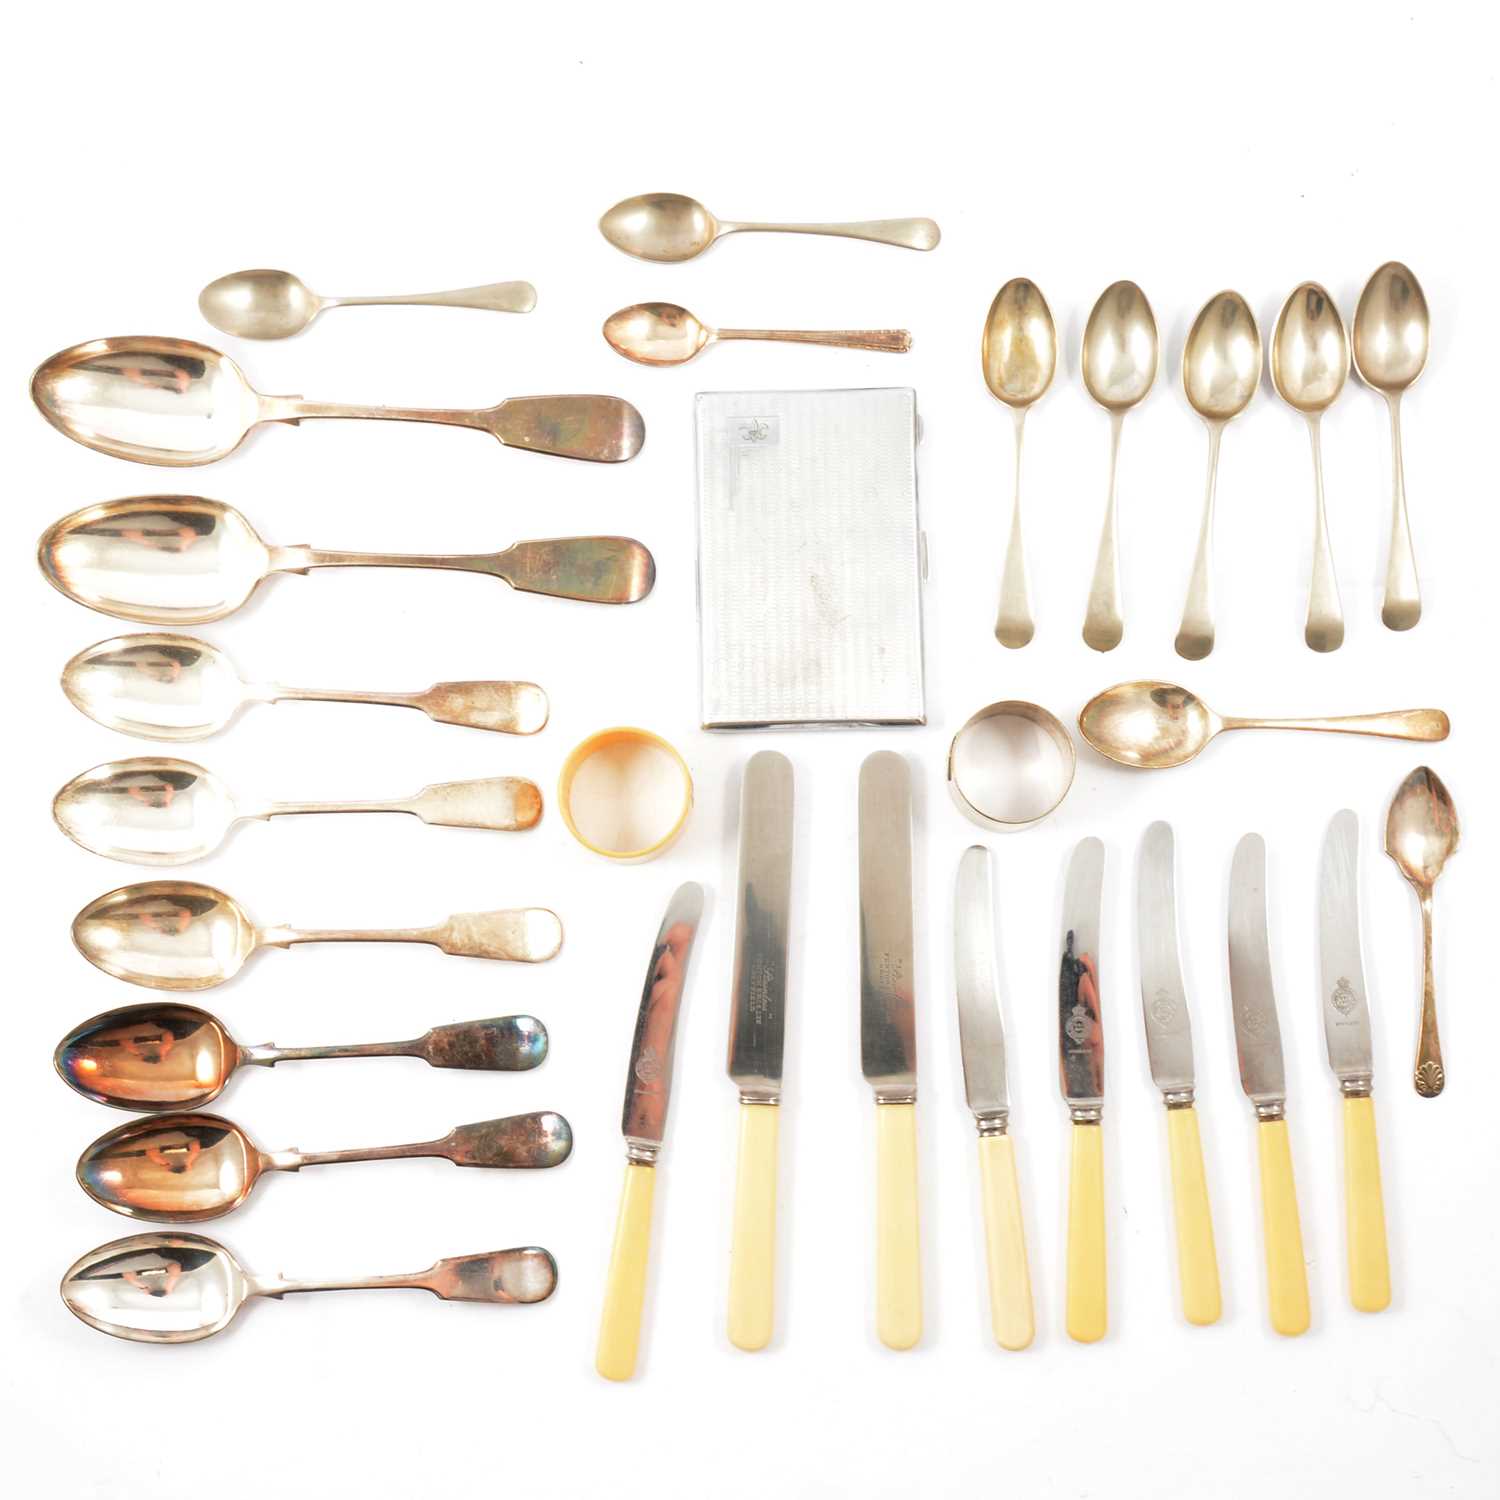 Lot 135 - Silver teaspoons, sugar tongs, napkin ring, and silver-plated cutlery.